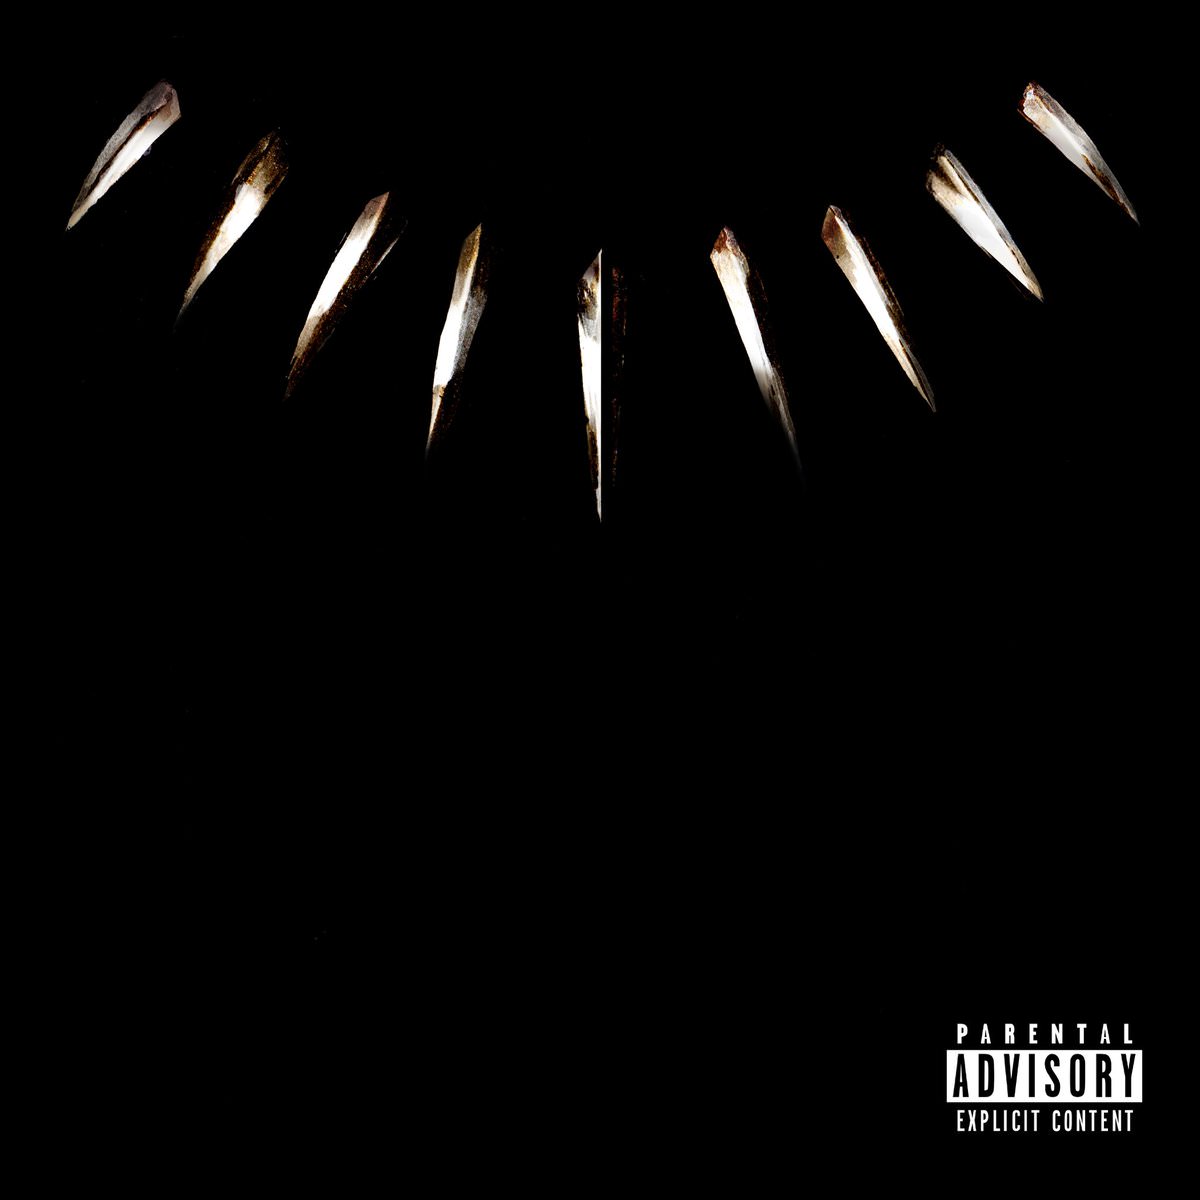 Album art and tracklist from Kendrick Lamar's 'Black Panther: The Album' soundtrack revealed